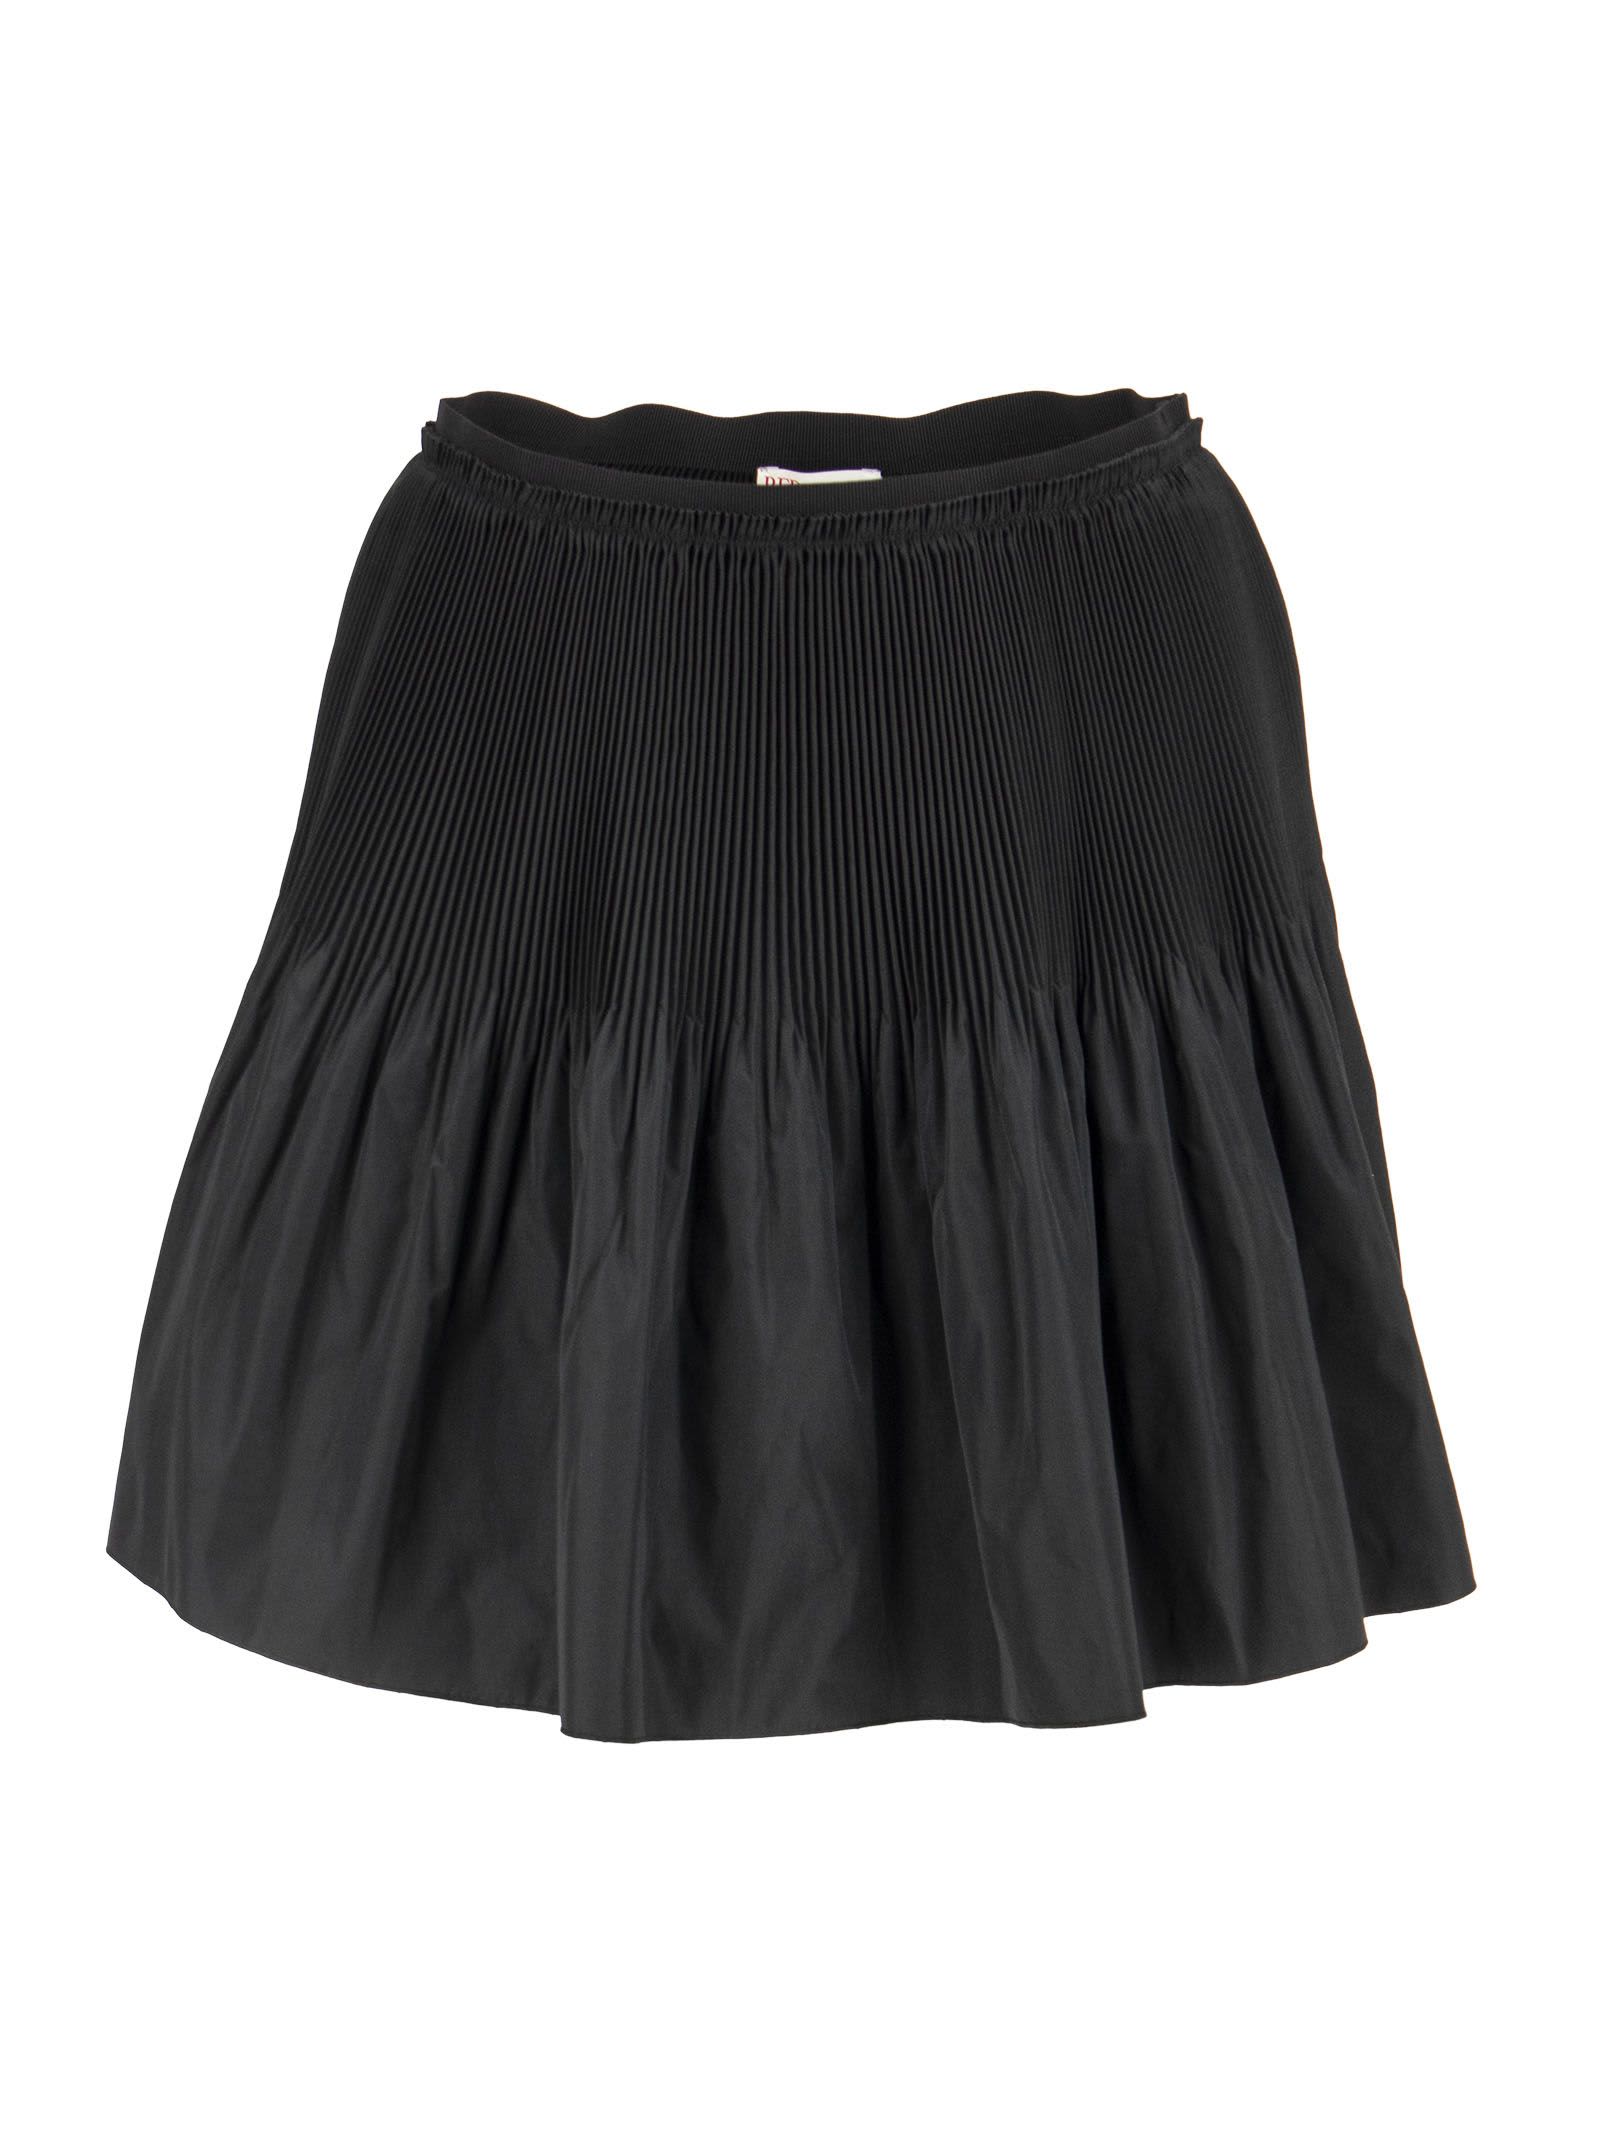 RED Valentino Pleated Mini Skirt With Techno Fabric